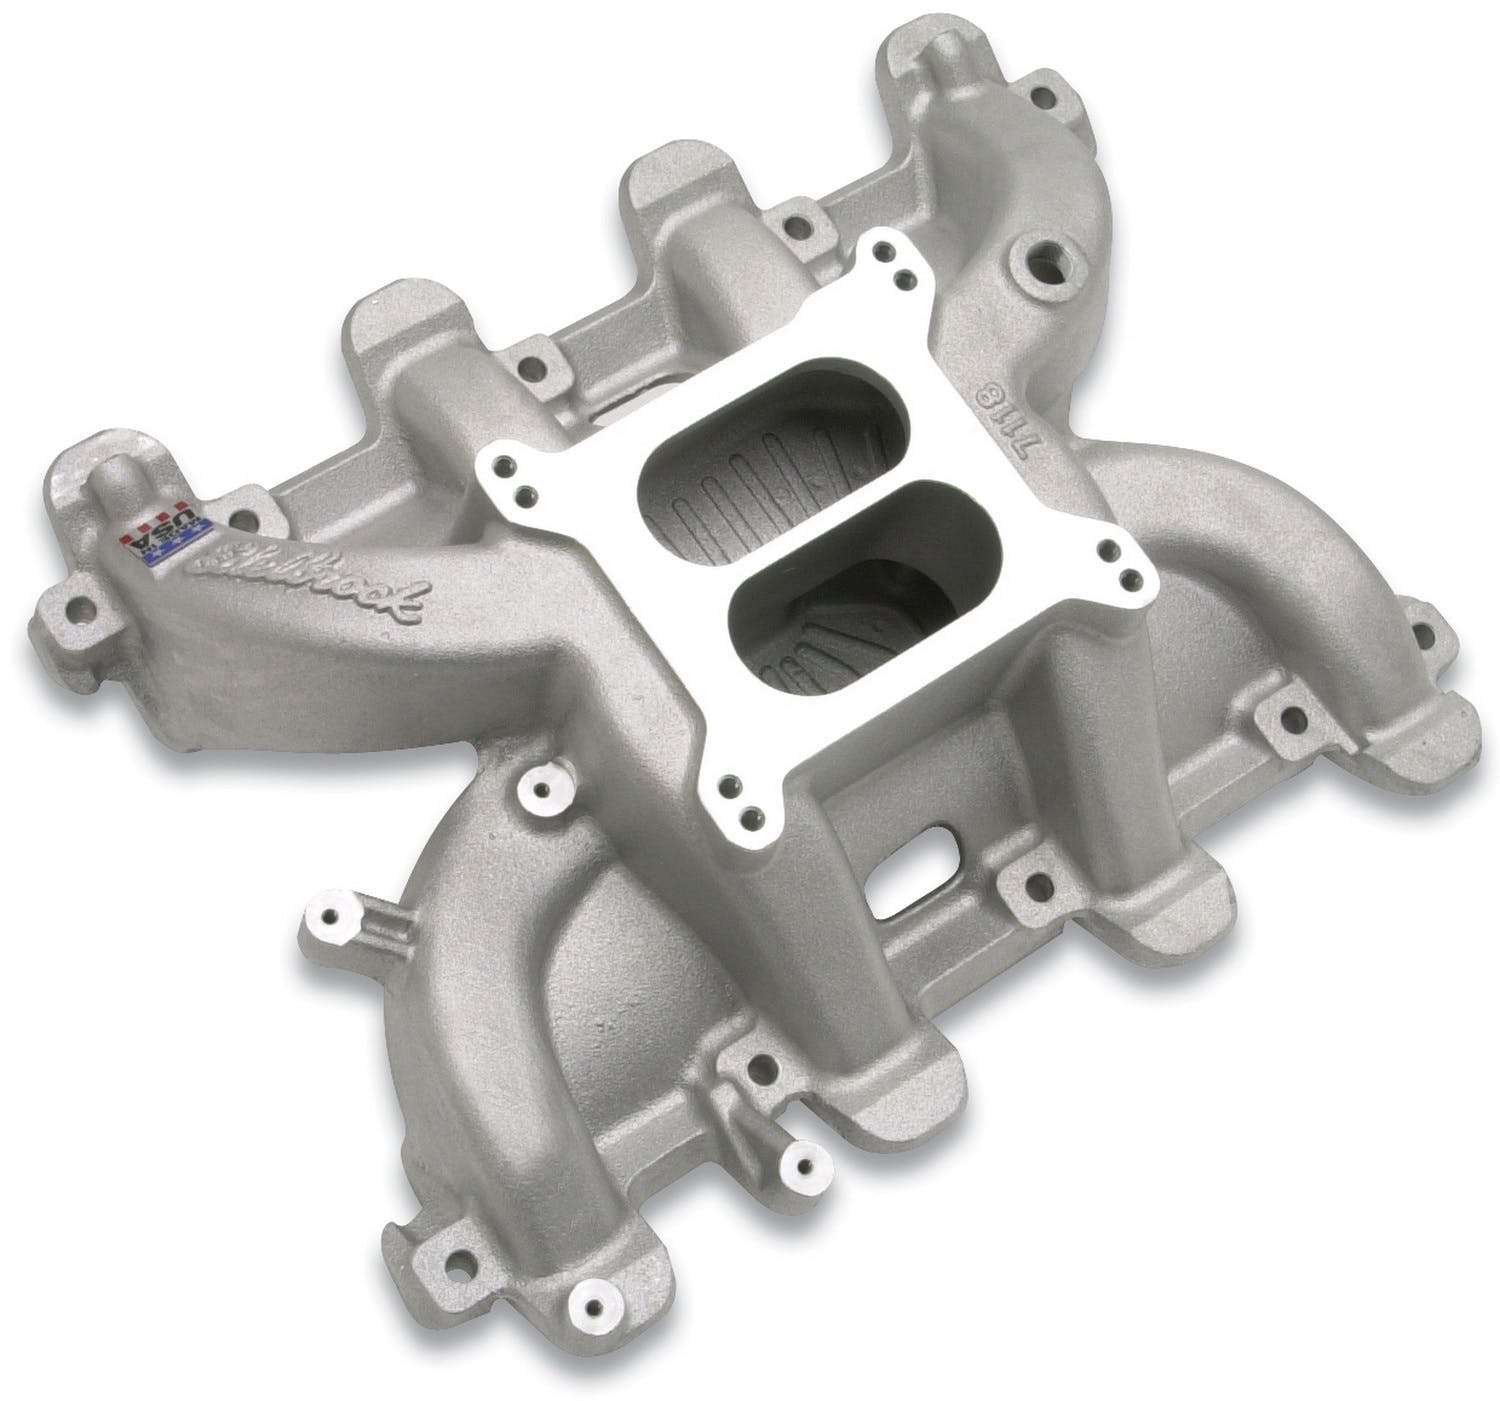 Edelbrock 71187 MANIFOLD PERF RPM FOR GM LS1 CARBURETED